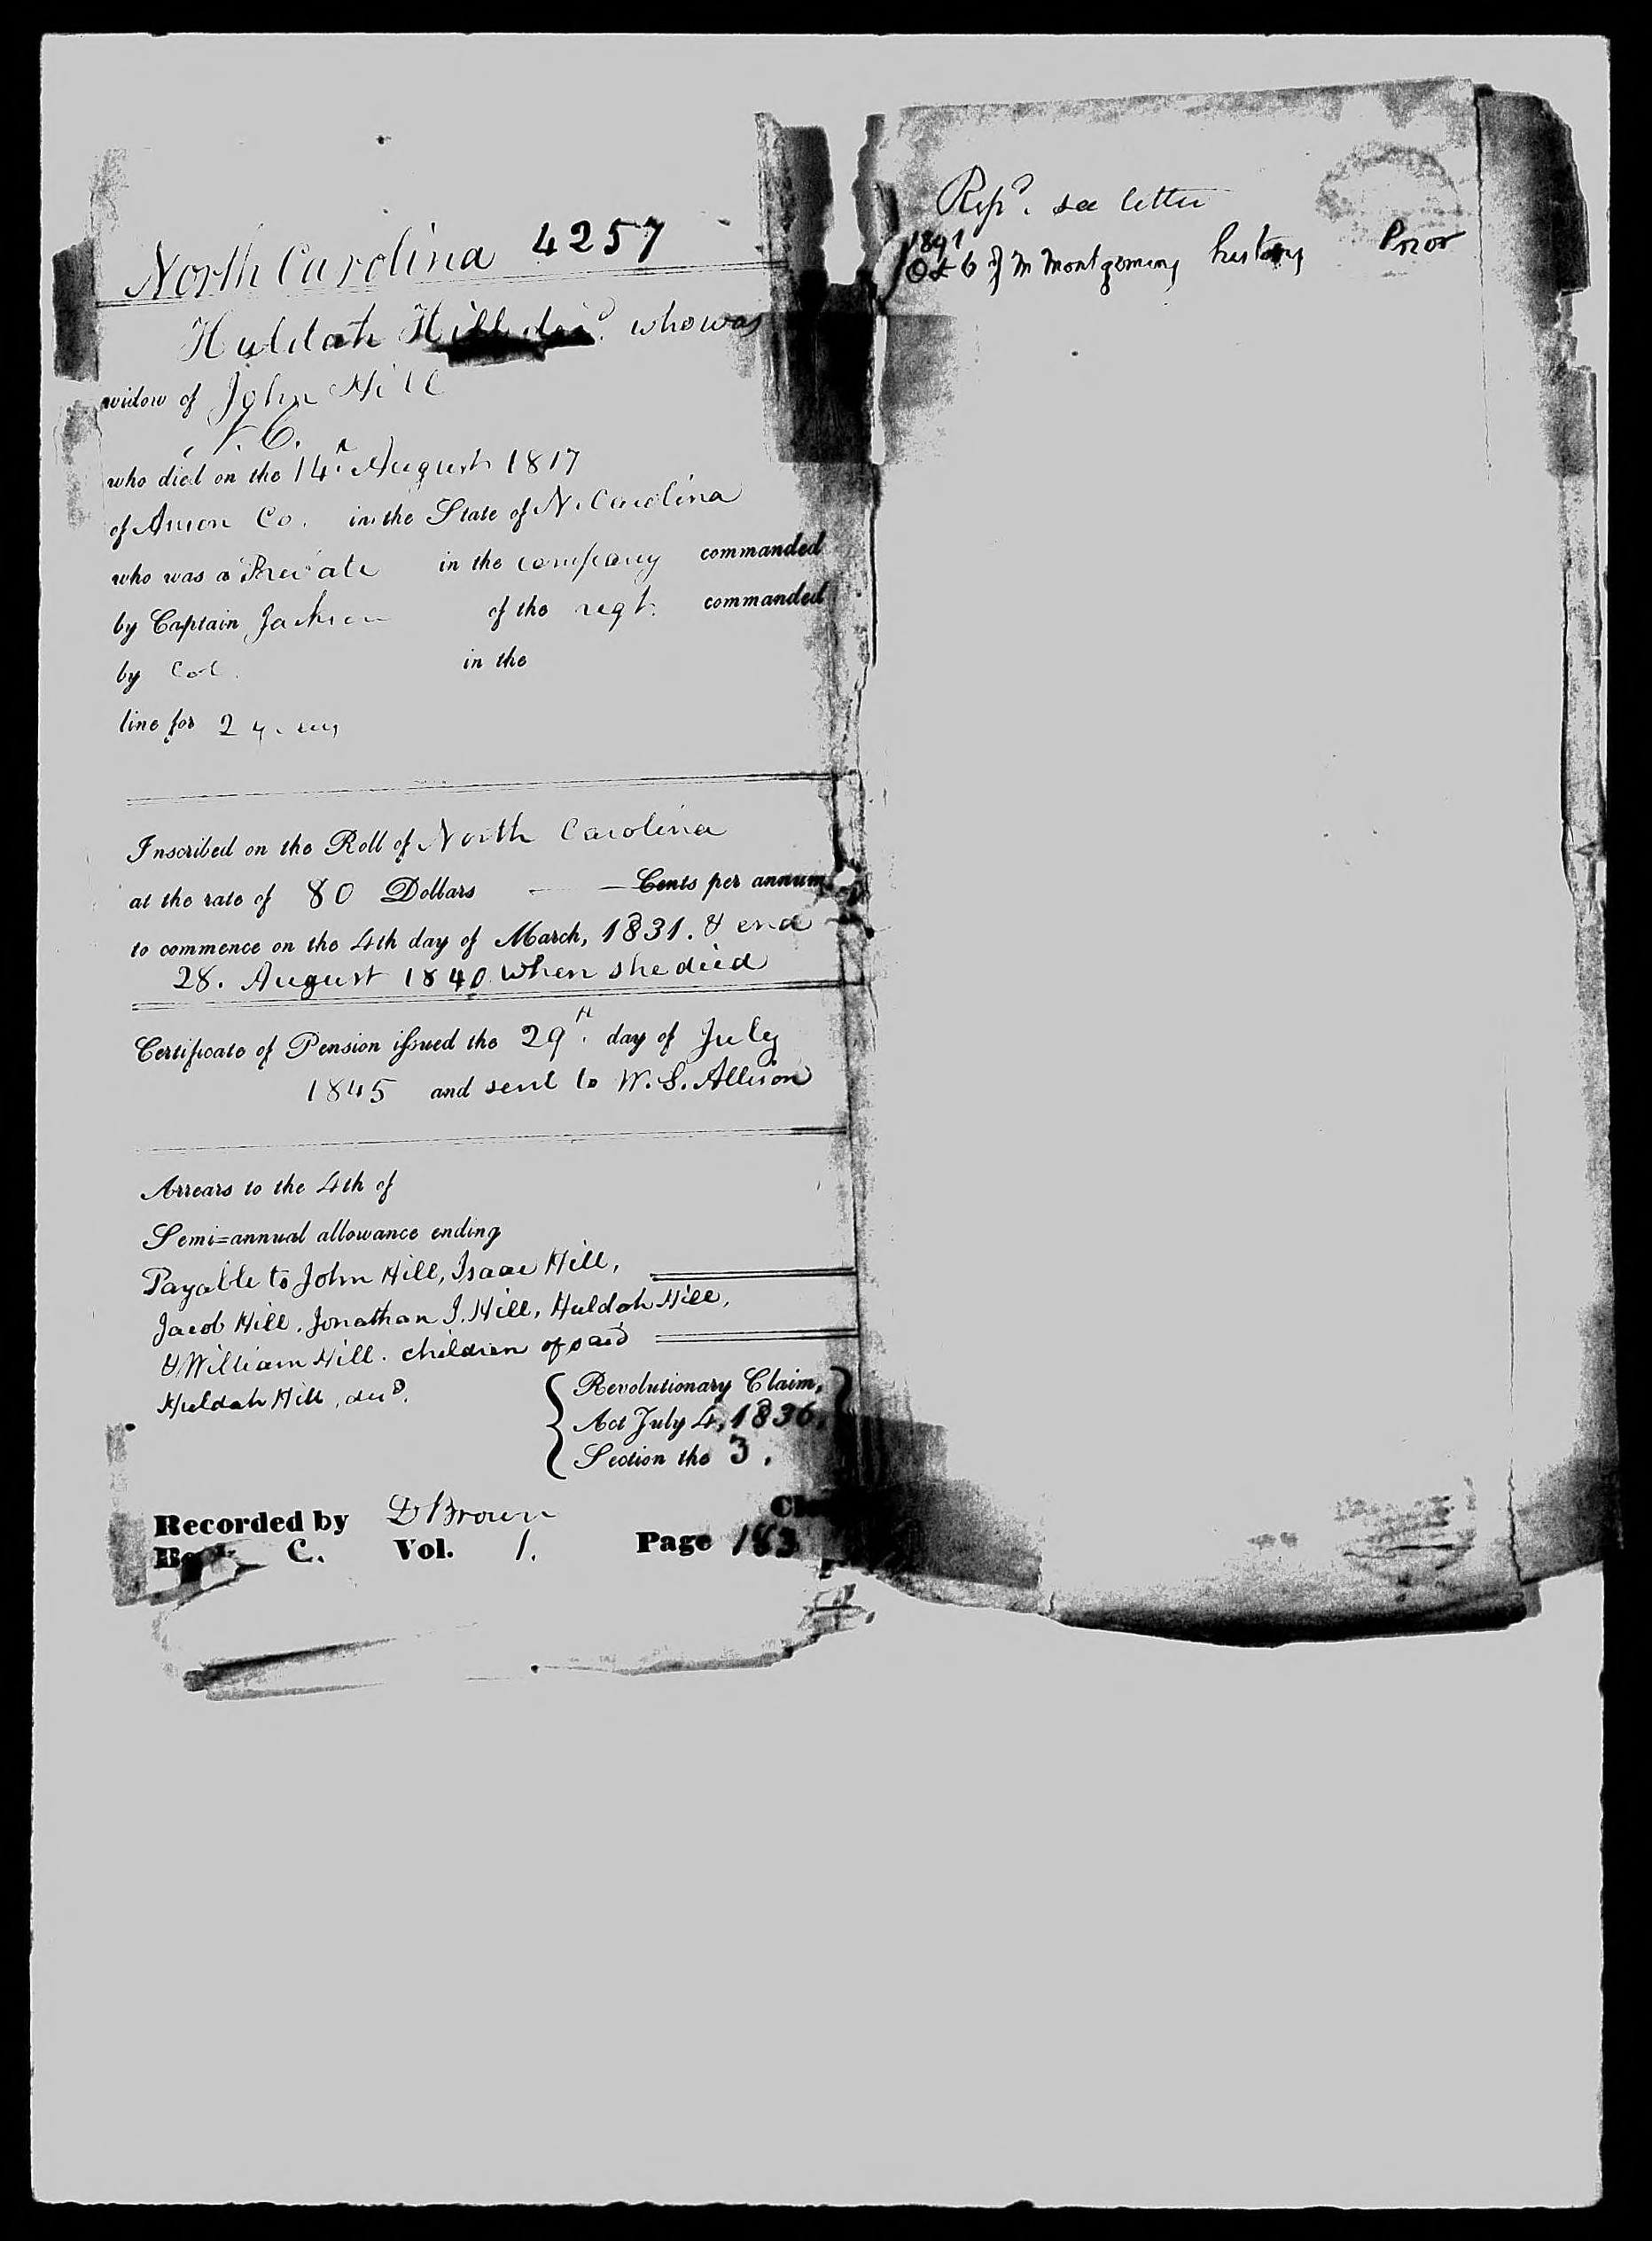 Docket for Widow's Pension from the U.S. Pension Office for Huldah Hill, 29 July 1845